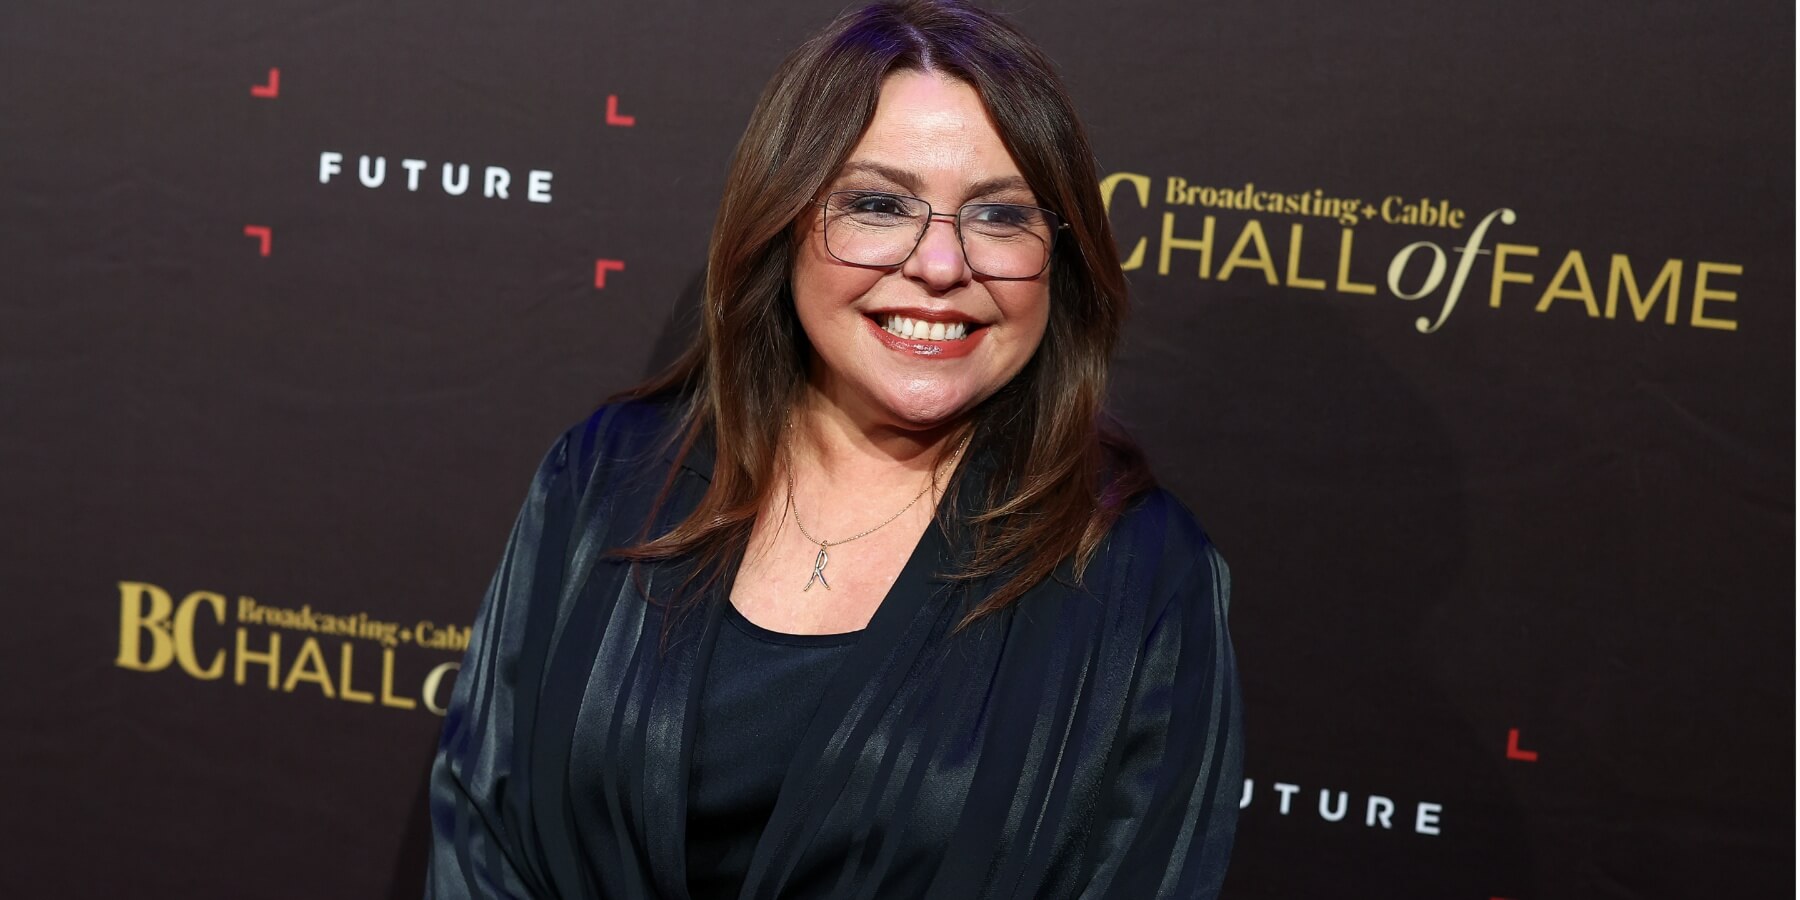 Rachael Ray will star in a new cooking series for A+E Networks